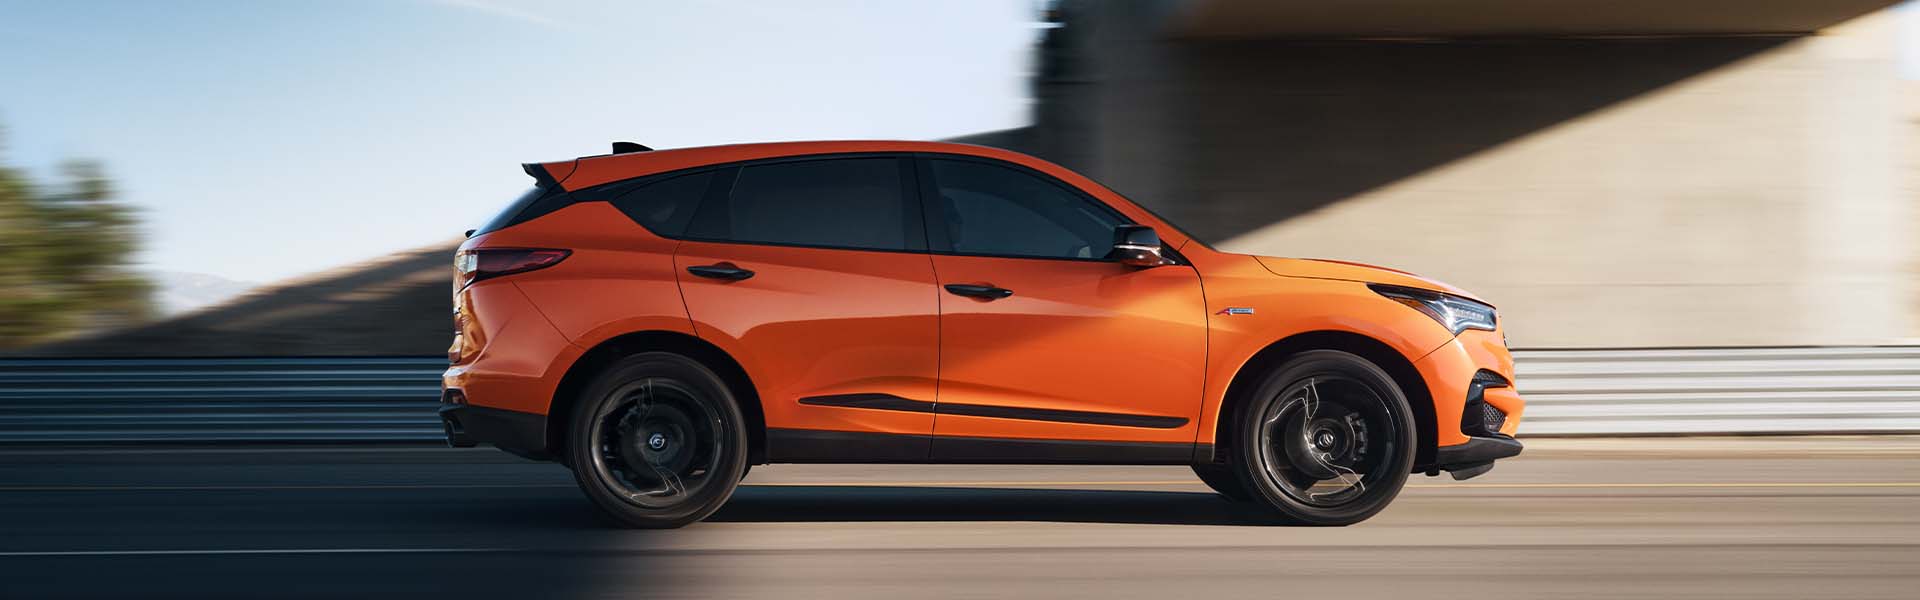 Model Features of the 2021 Acura RDX at Bobby Rahal Acura | Profile View of Orange 2021 Acura RDX Driving Under Underpass